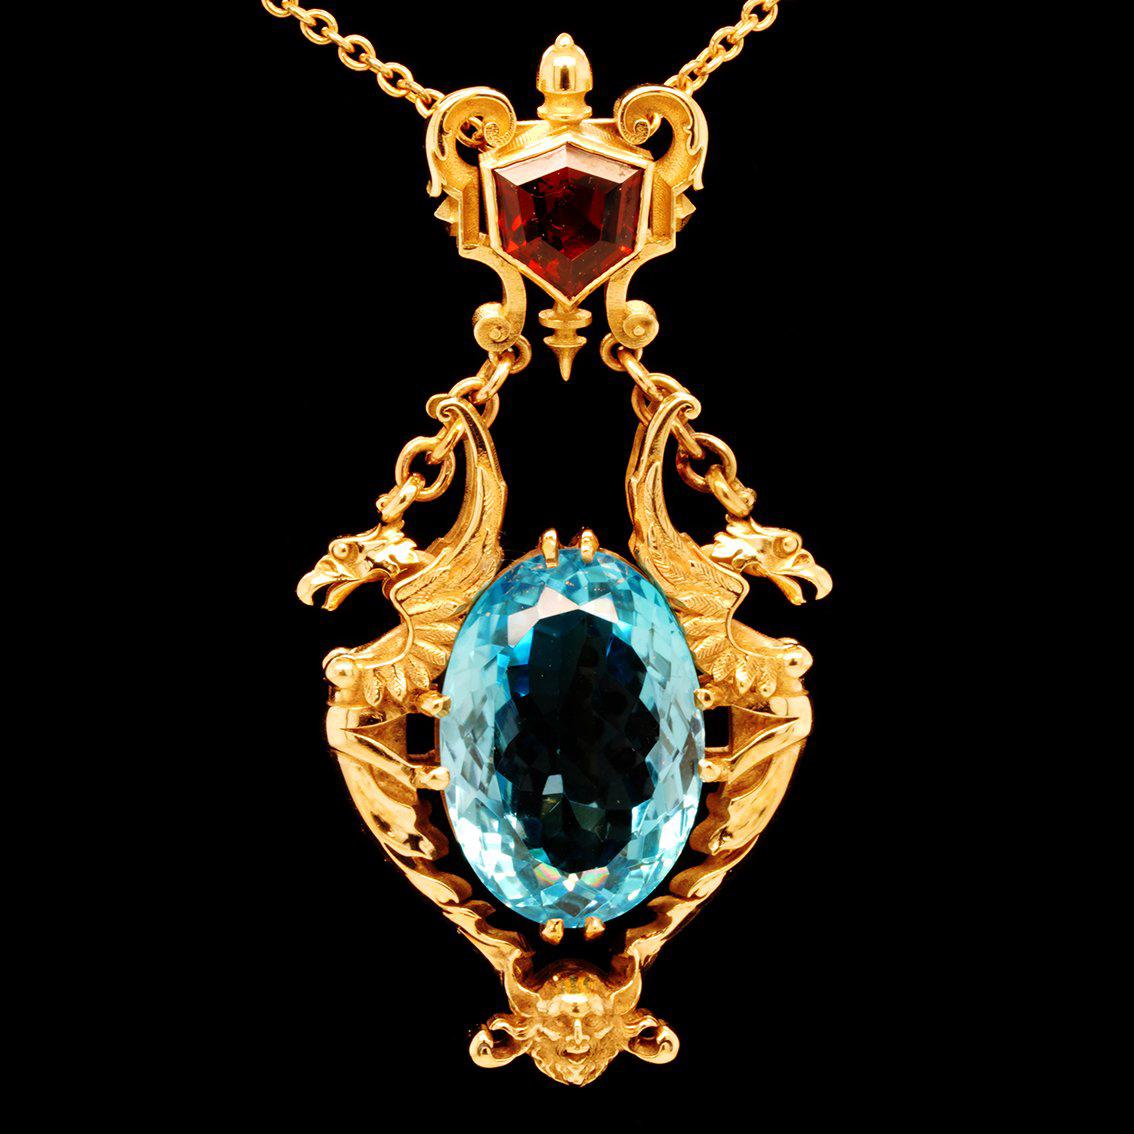 28ct Oval Swiss Blue Topaz, Garnet 9k Yellow Gold Antique Style Pendant Necklace For Sale 3